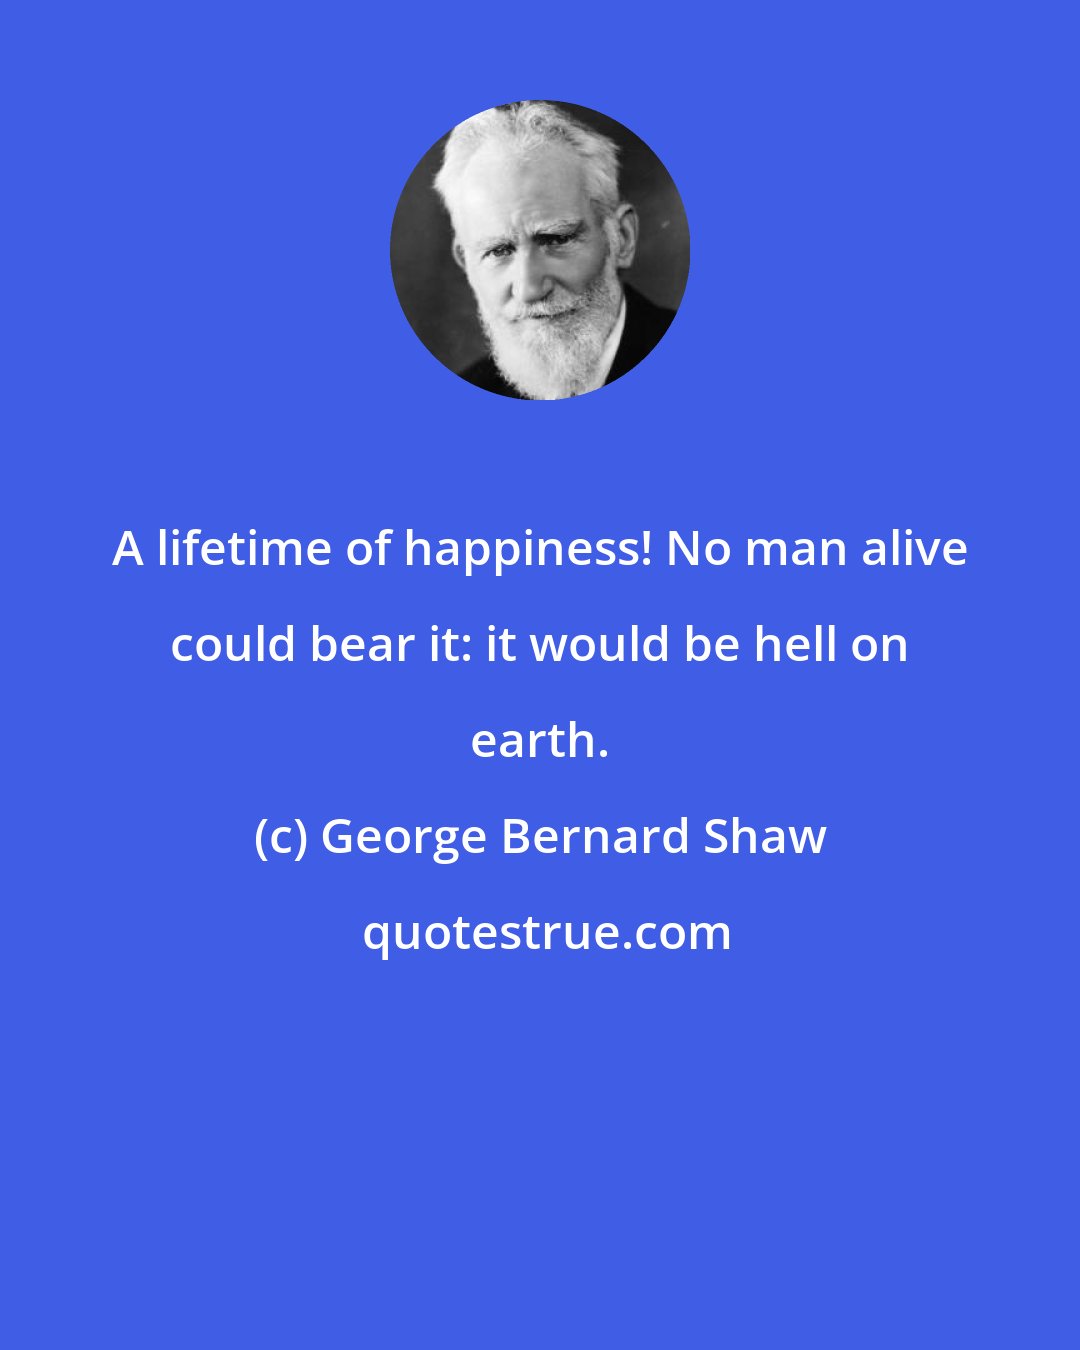 George Bernard Shaw: A lifetime of happiness! No man alive could bear it: it would be hell on earth.